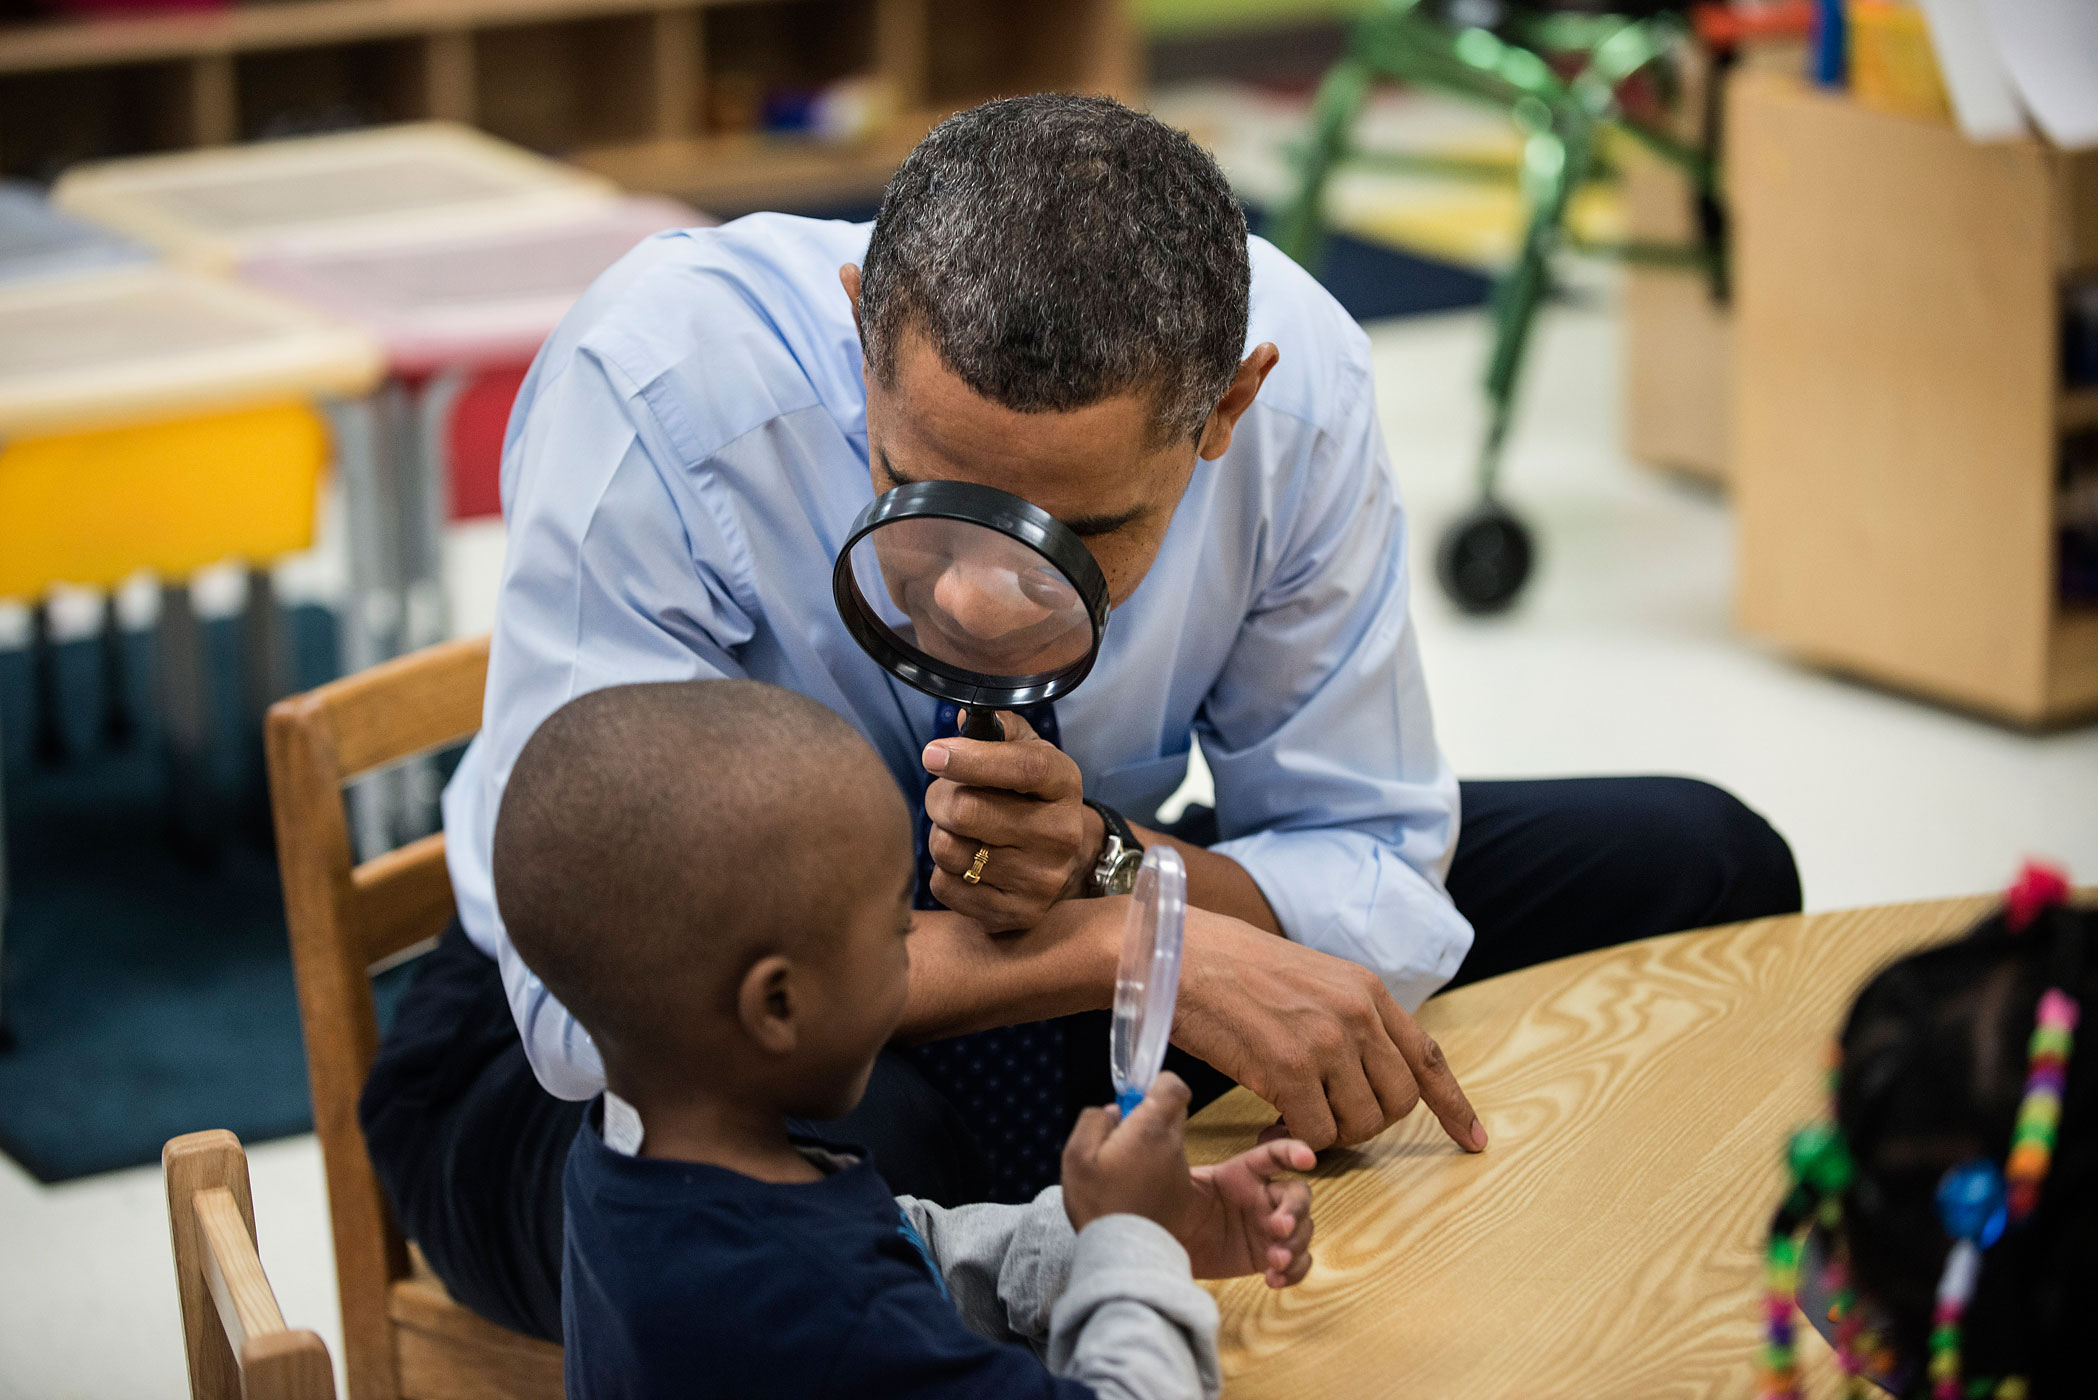 President Barack Obama looks at a boy with a magnifying glass while visiting children at College Heights Early Childhood Learning Center in Decatur, Ga., Feb. 14, 2012.